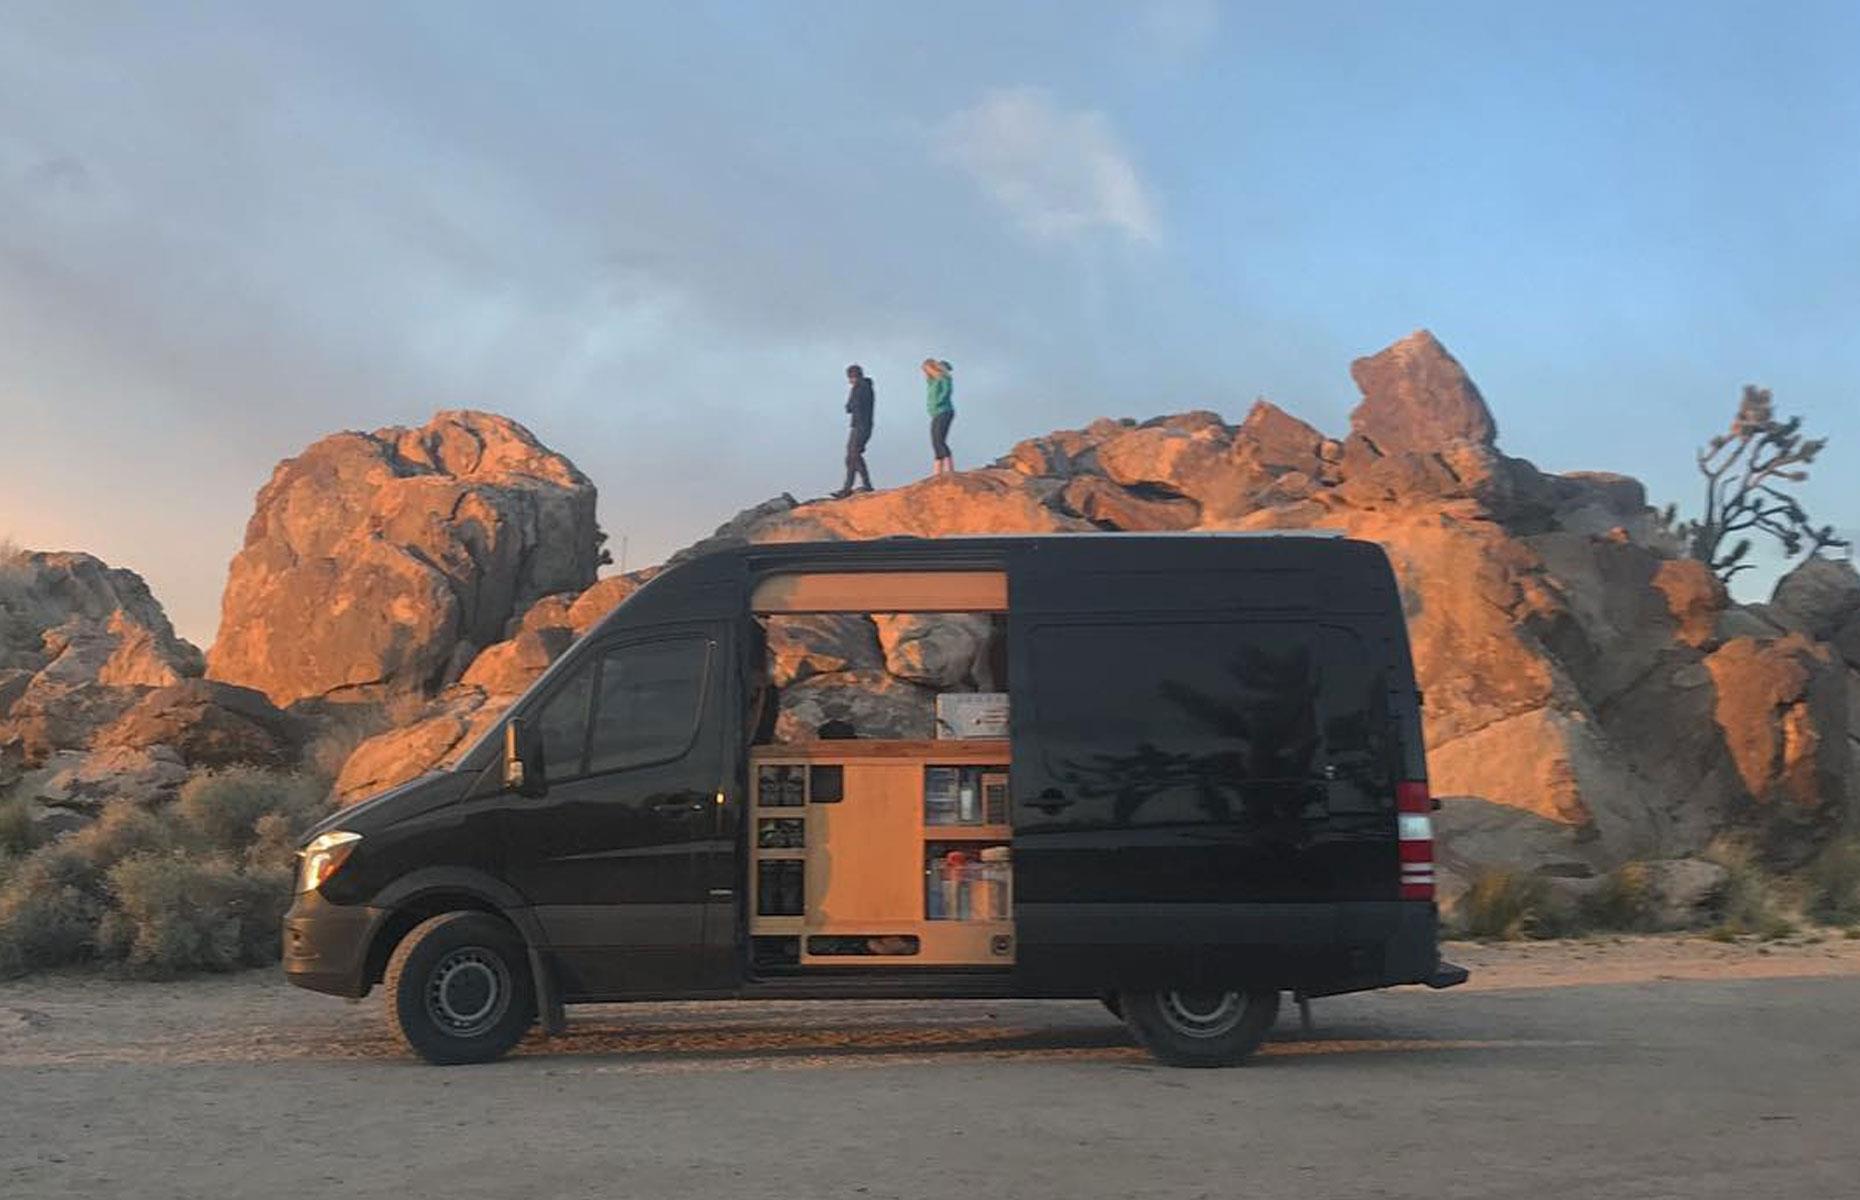 <p>Owners of awe-inspiring Instagram account <a href="https://www.instagram.com/permanentroadtrip/?hl=en">@permanentroadtrip</a>, Joe, Emilie and their dogs have been hitting up some of North America’s most scenic national parks in their converted Mercedes Sprinter van. Both were avid travellers for some time, but as of December 2016, they decided to move into the van full-time and head out on the open road. </p>